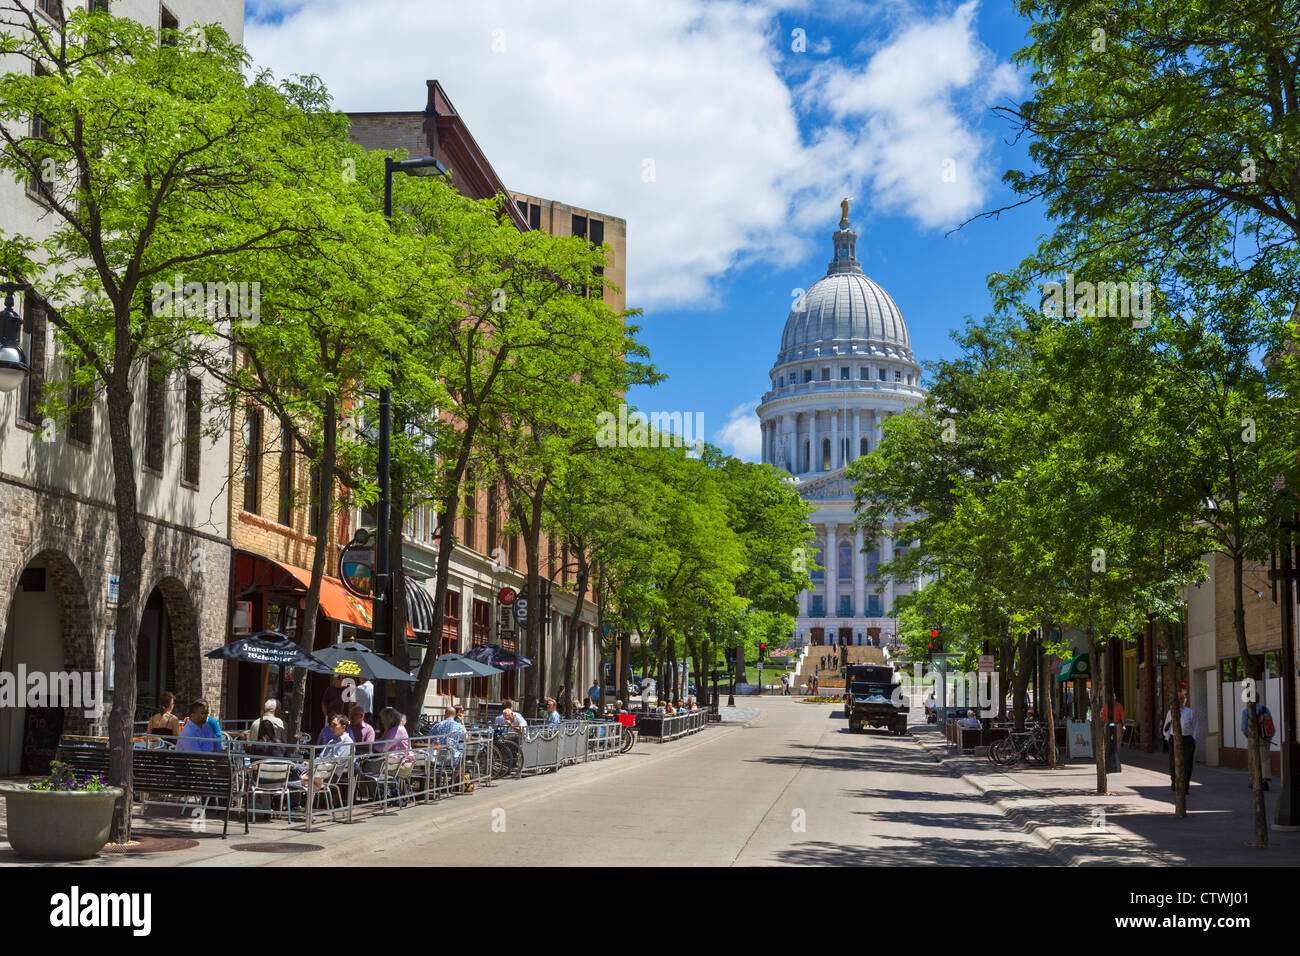 Cafes and restaurants on State Street looking towards the Wisconsin State Capitol, Madison, Wisconsin, USA Stock Photo